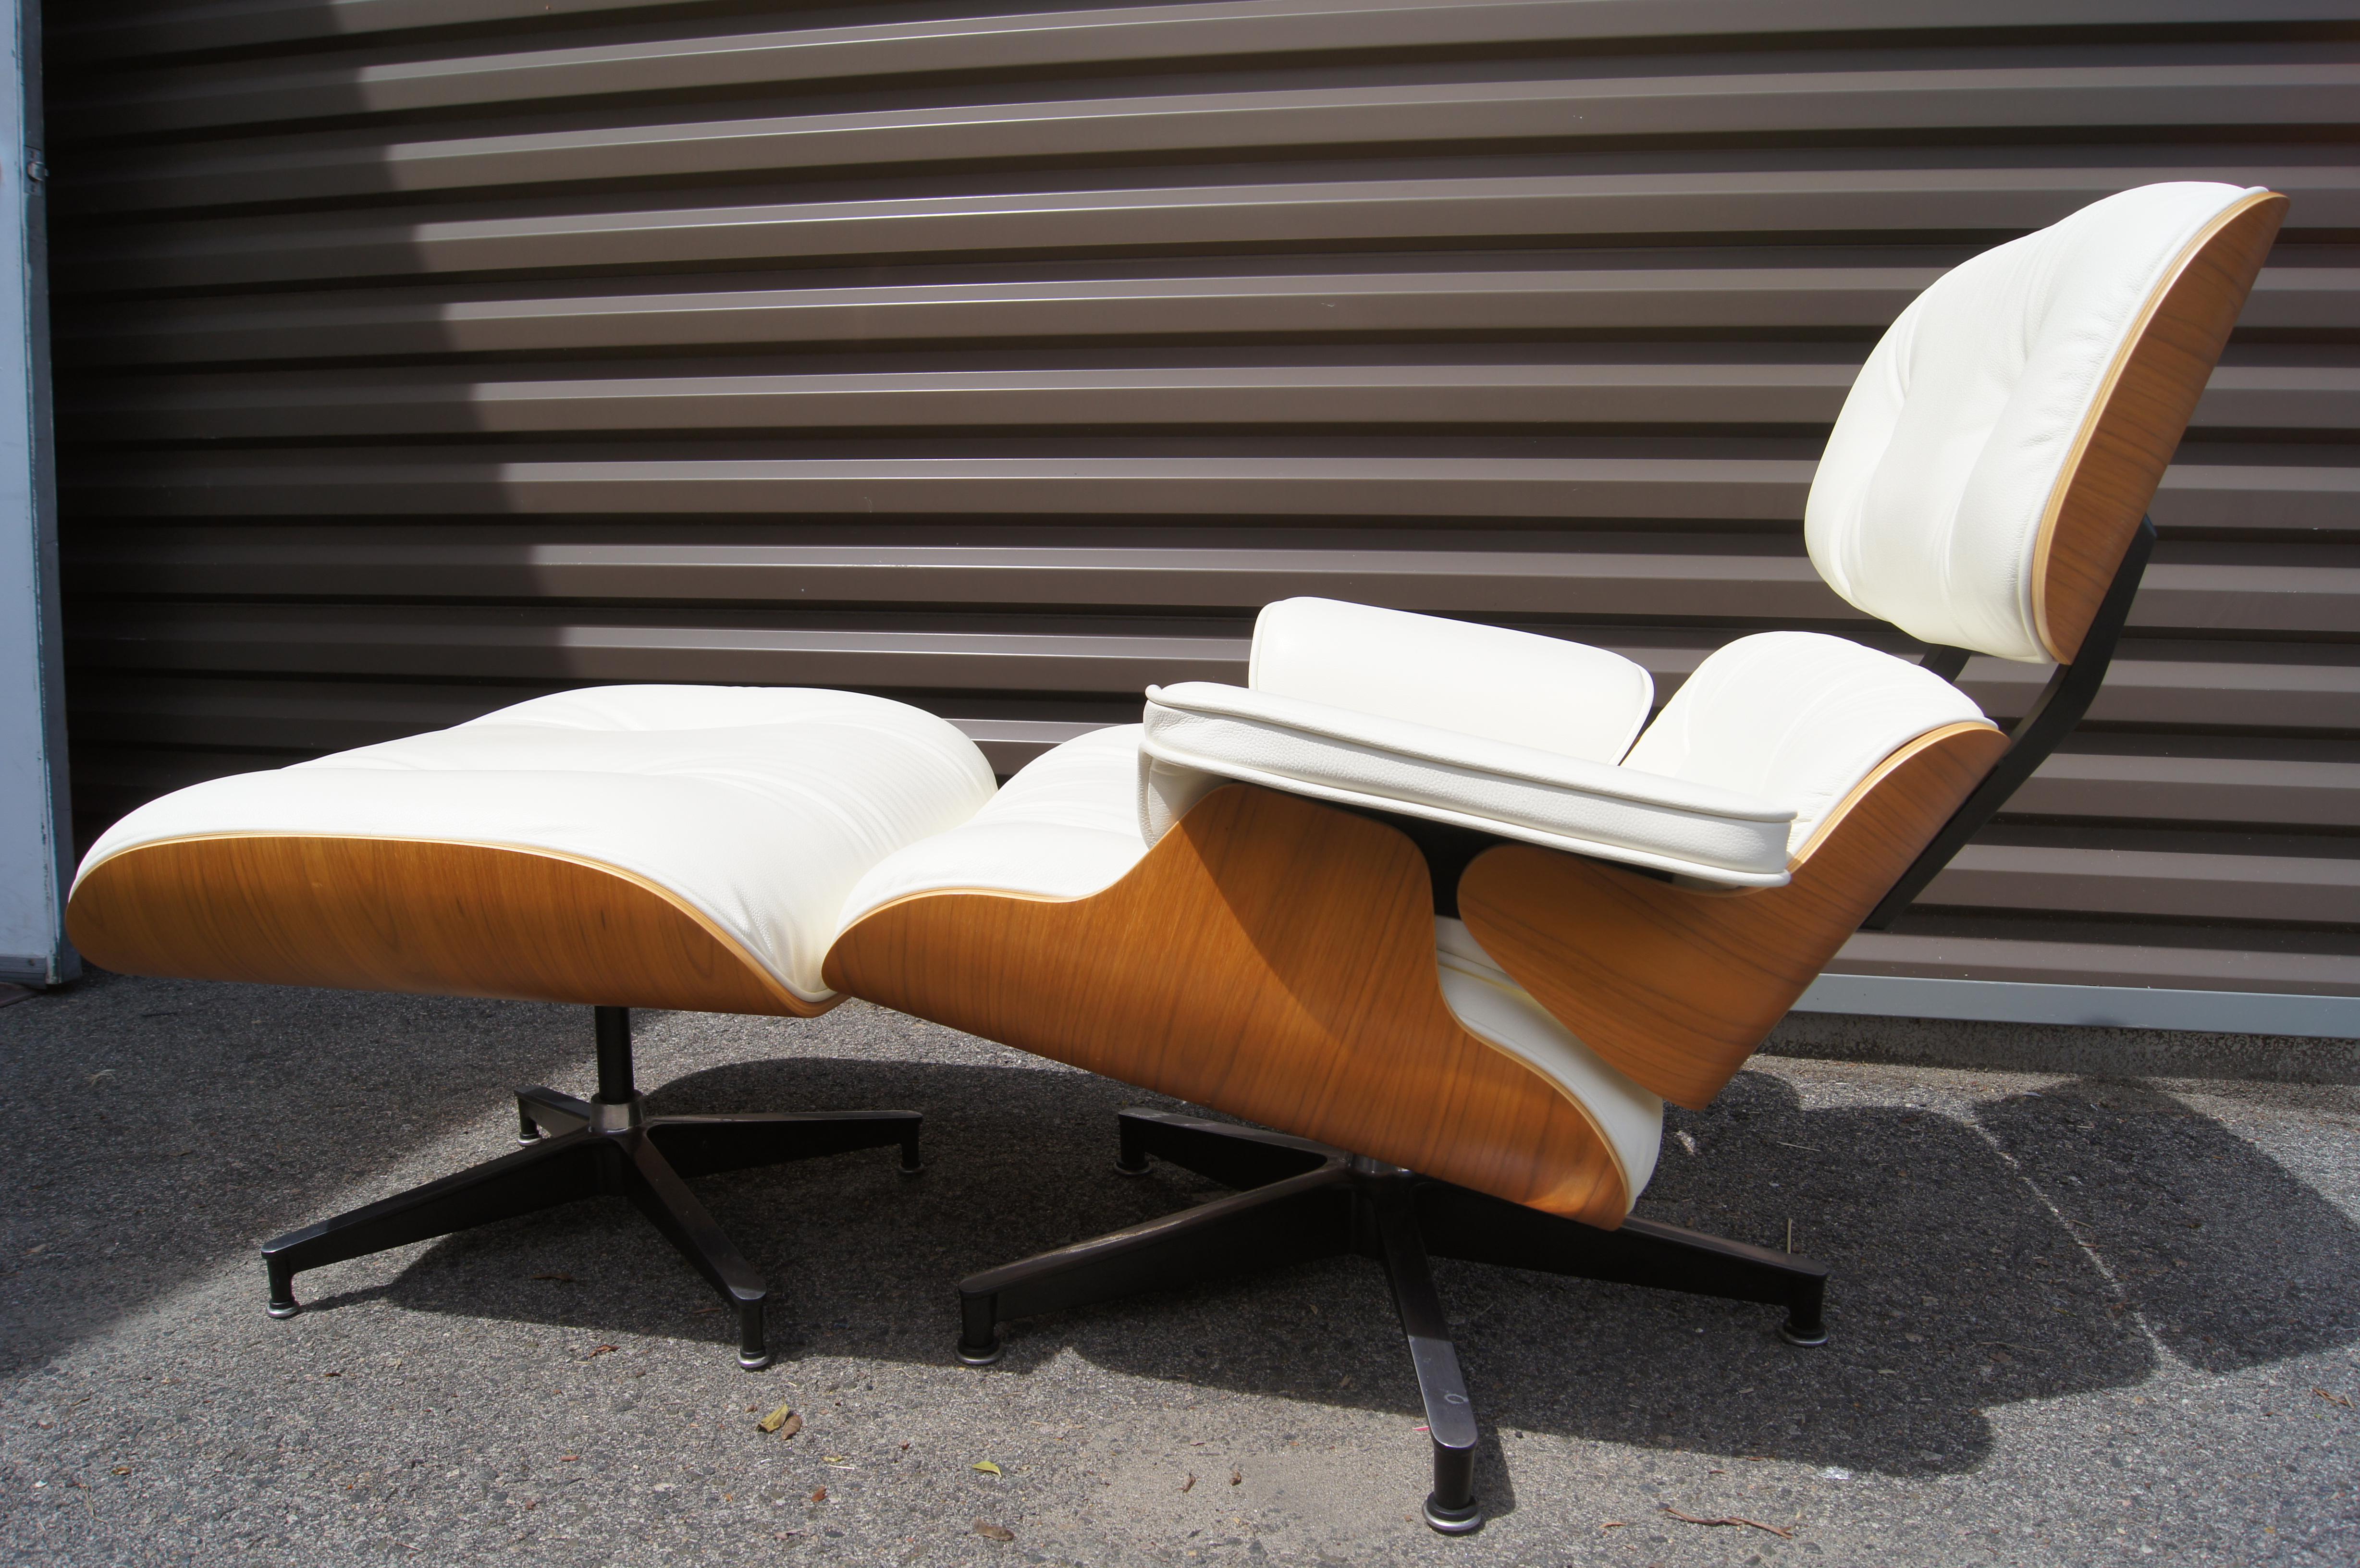 This version of Charles and Ray Eames's iconic molded plywood lounge chair for Herman Miller, model 670/671, features a walnut shell and pearl white leather upholstery. The chair's angled tilt, swiveling base, and matching ottoman offer the deepest